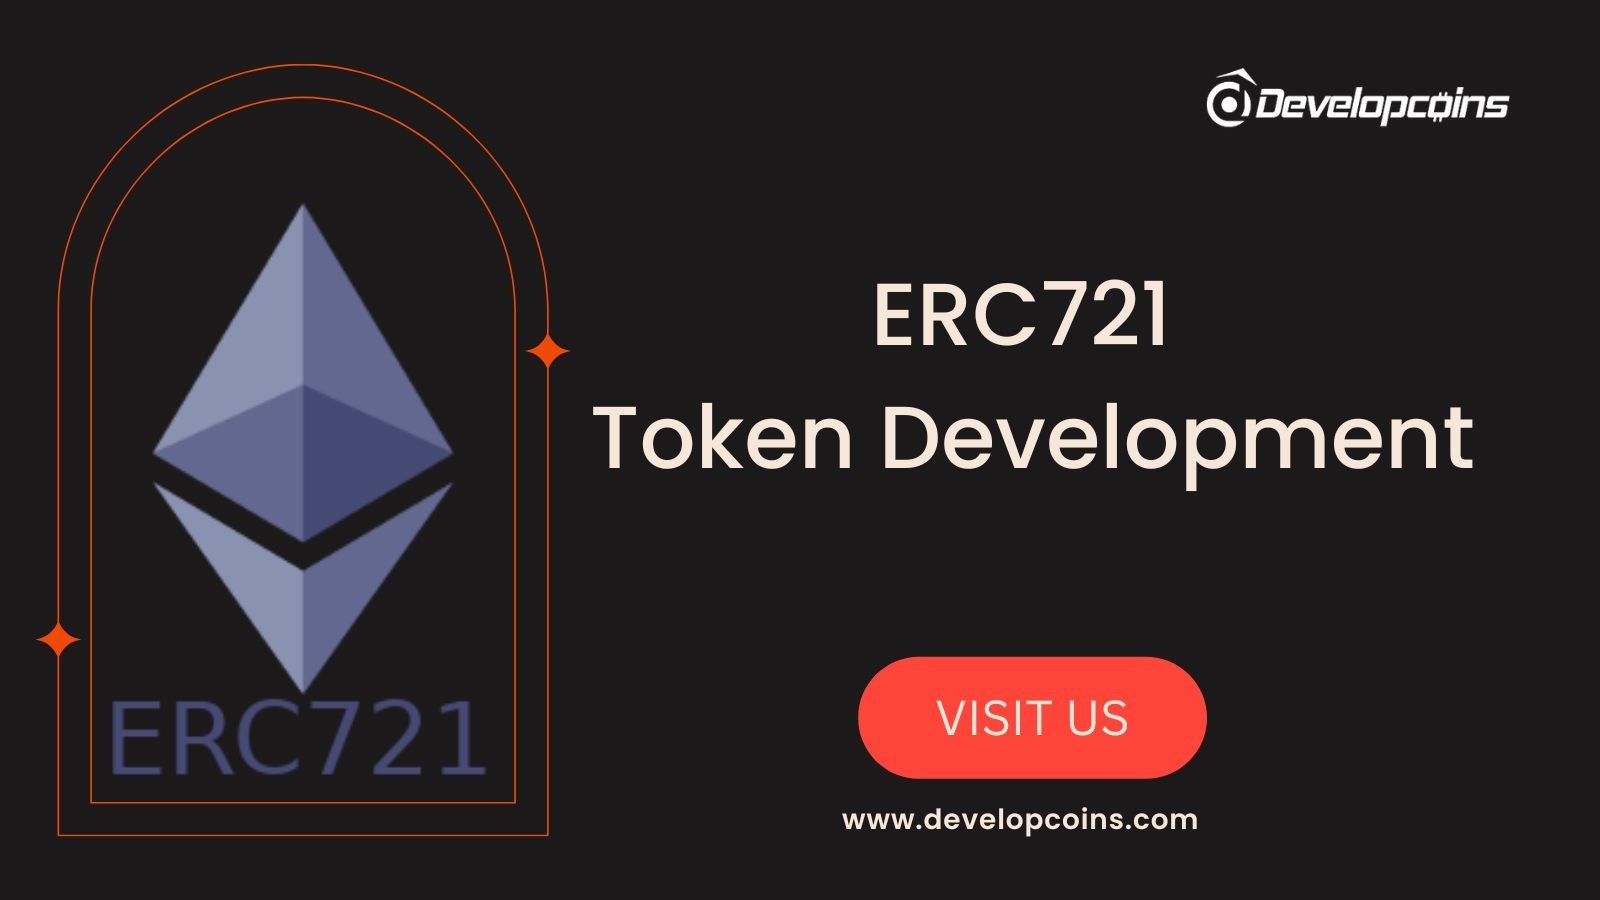 Make Your Gaming Experience Good By Creating ERC721 Token With Developcoins